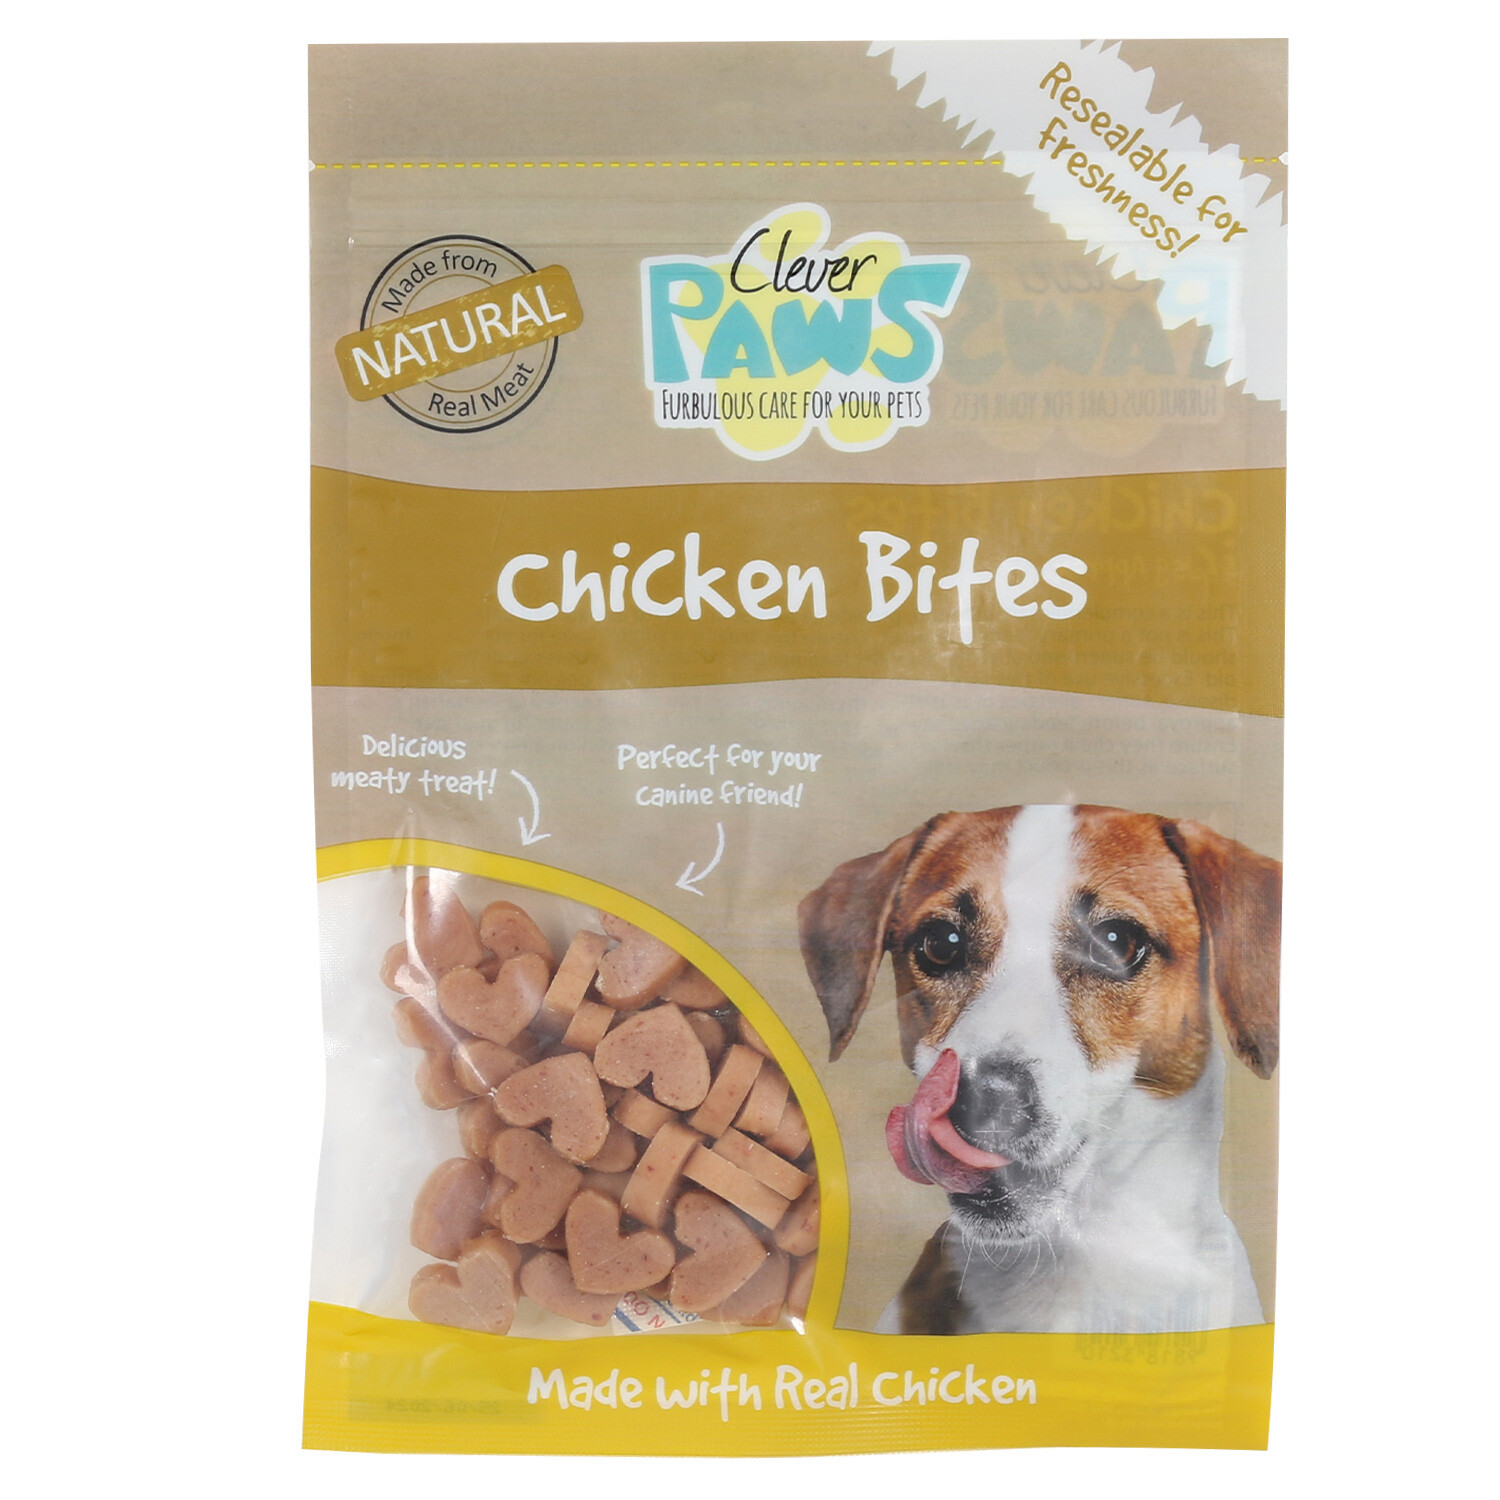 Clever Paws Chicken Bites Dog Treat 65g Image 1